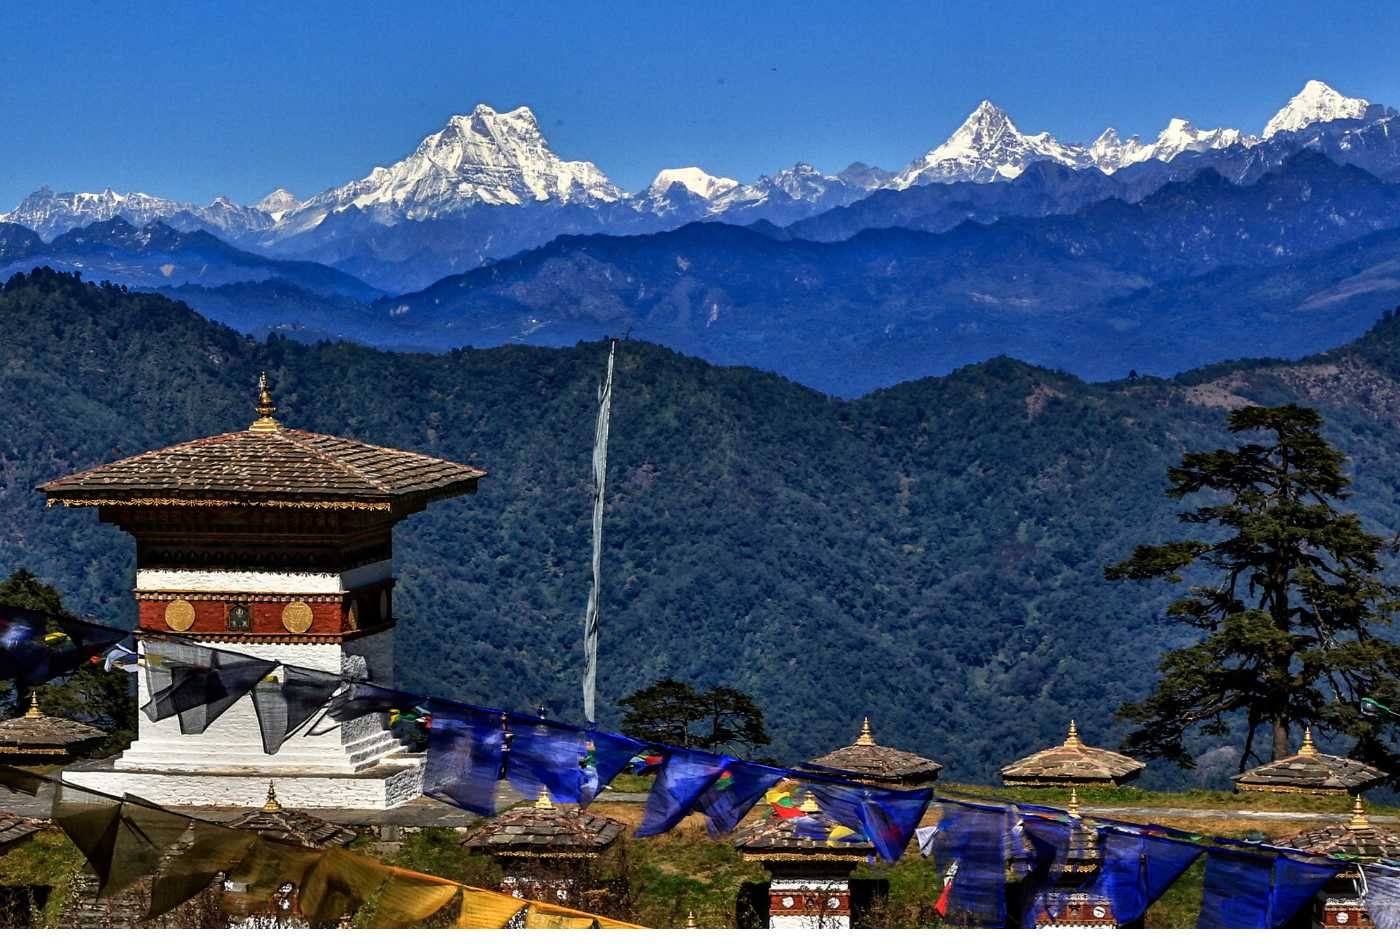 Dochu La Pass, a mountain pass in Bhutan, with a stunning view of snow-capped peaks in the background, and a small monuments in foreground.